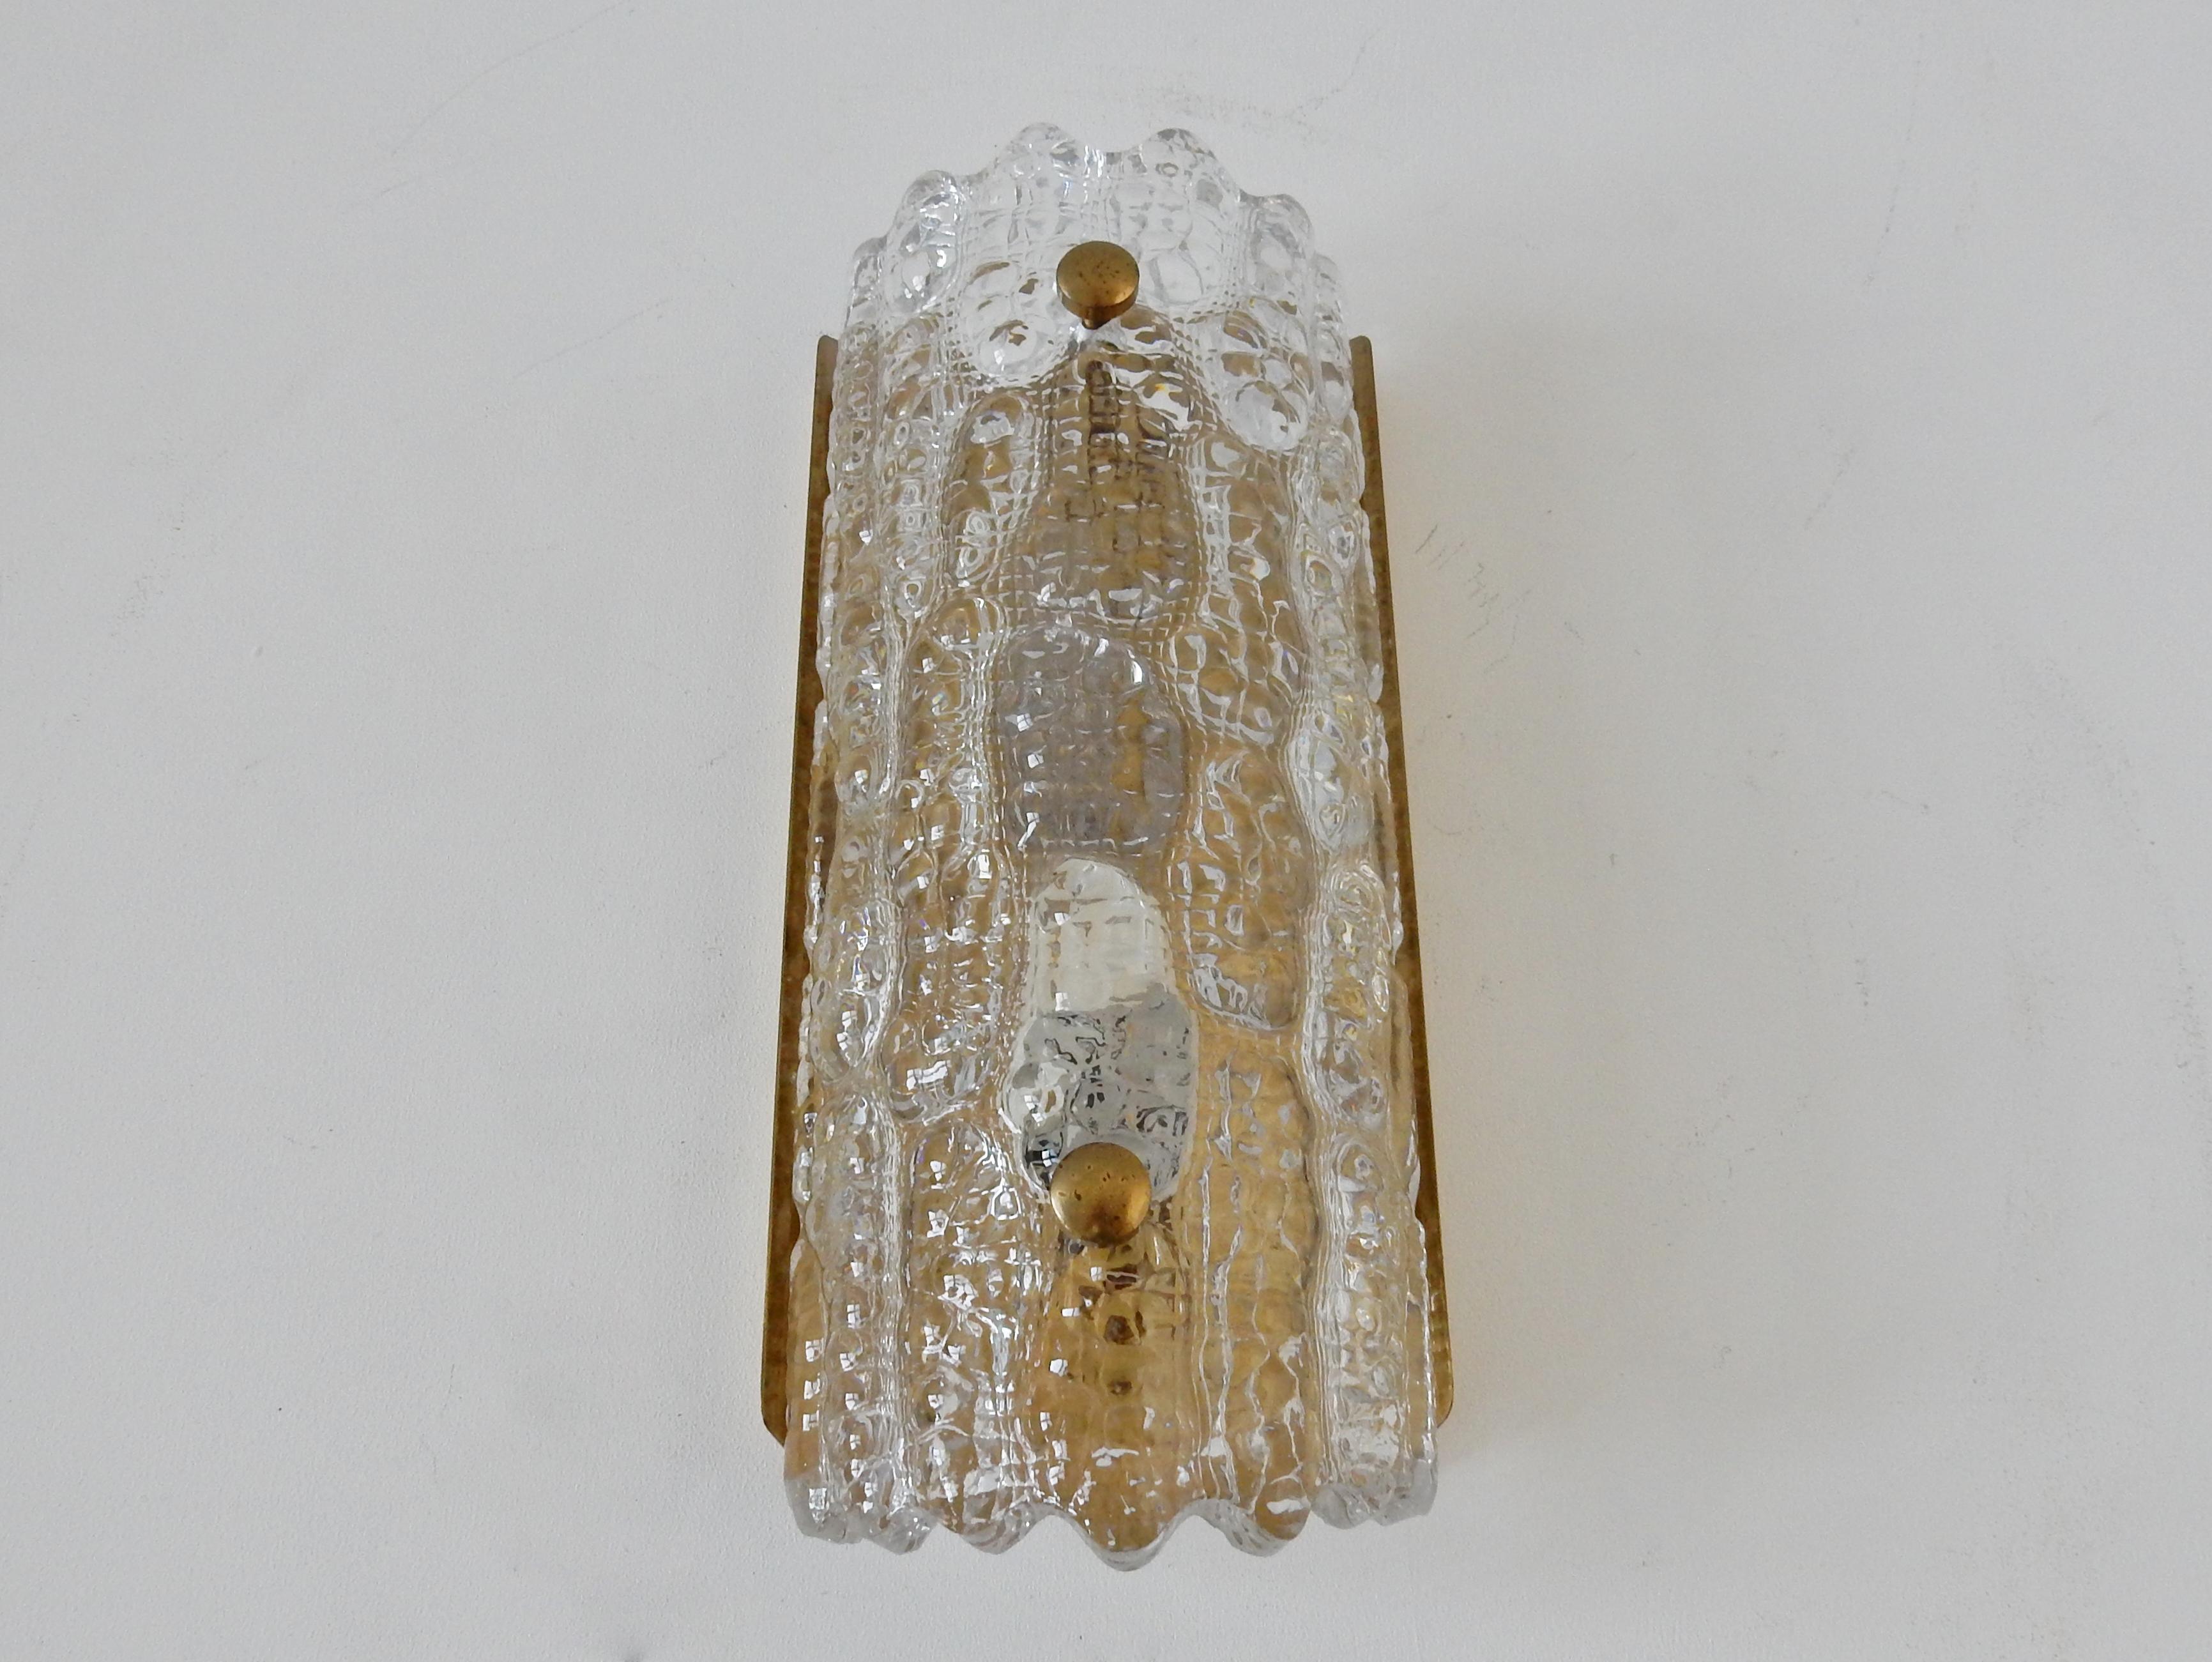 This beautiful and impressive crystal glass and brass 'Gefion' wall sconce was designed by Carl Fagerlund for Orrefors and Lyfa in the 1960s. The sconce is made of thick crystal glass and held in place by two brass screws on a brass fixture. When